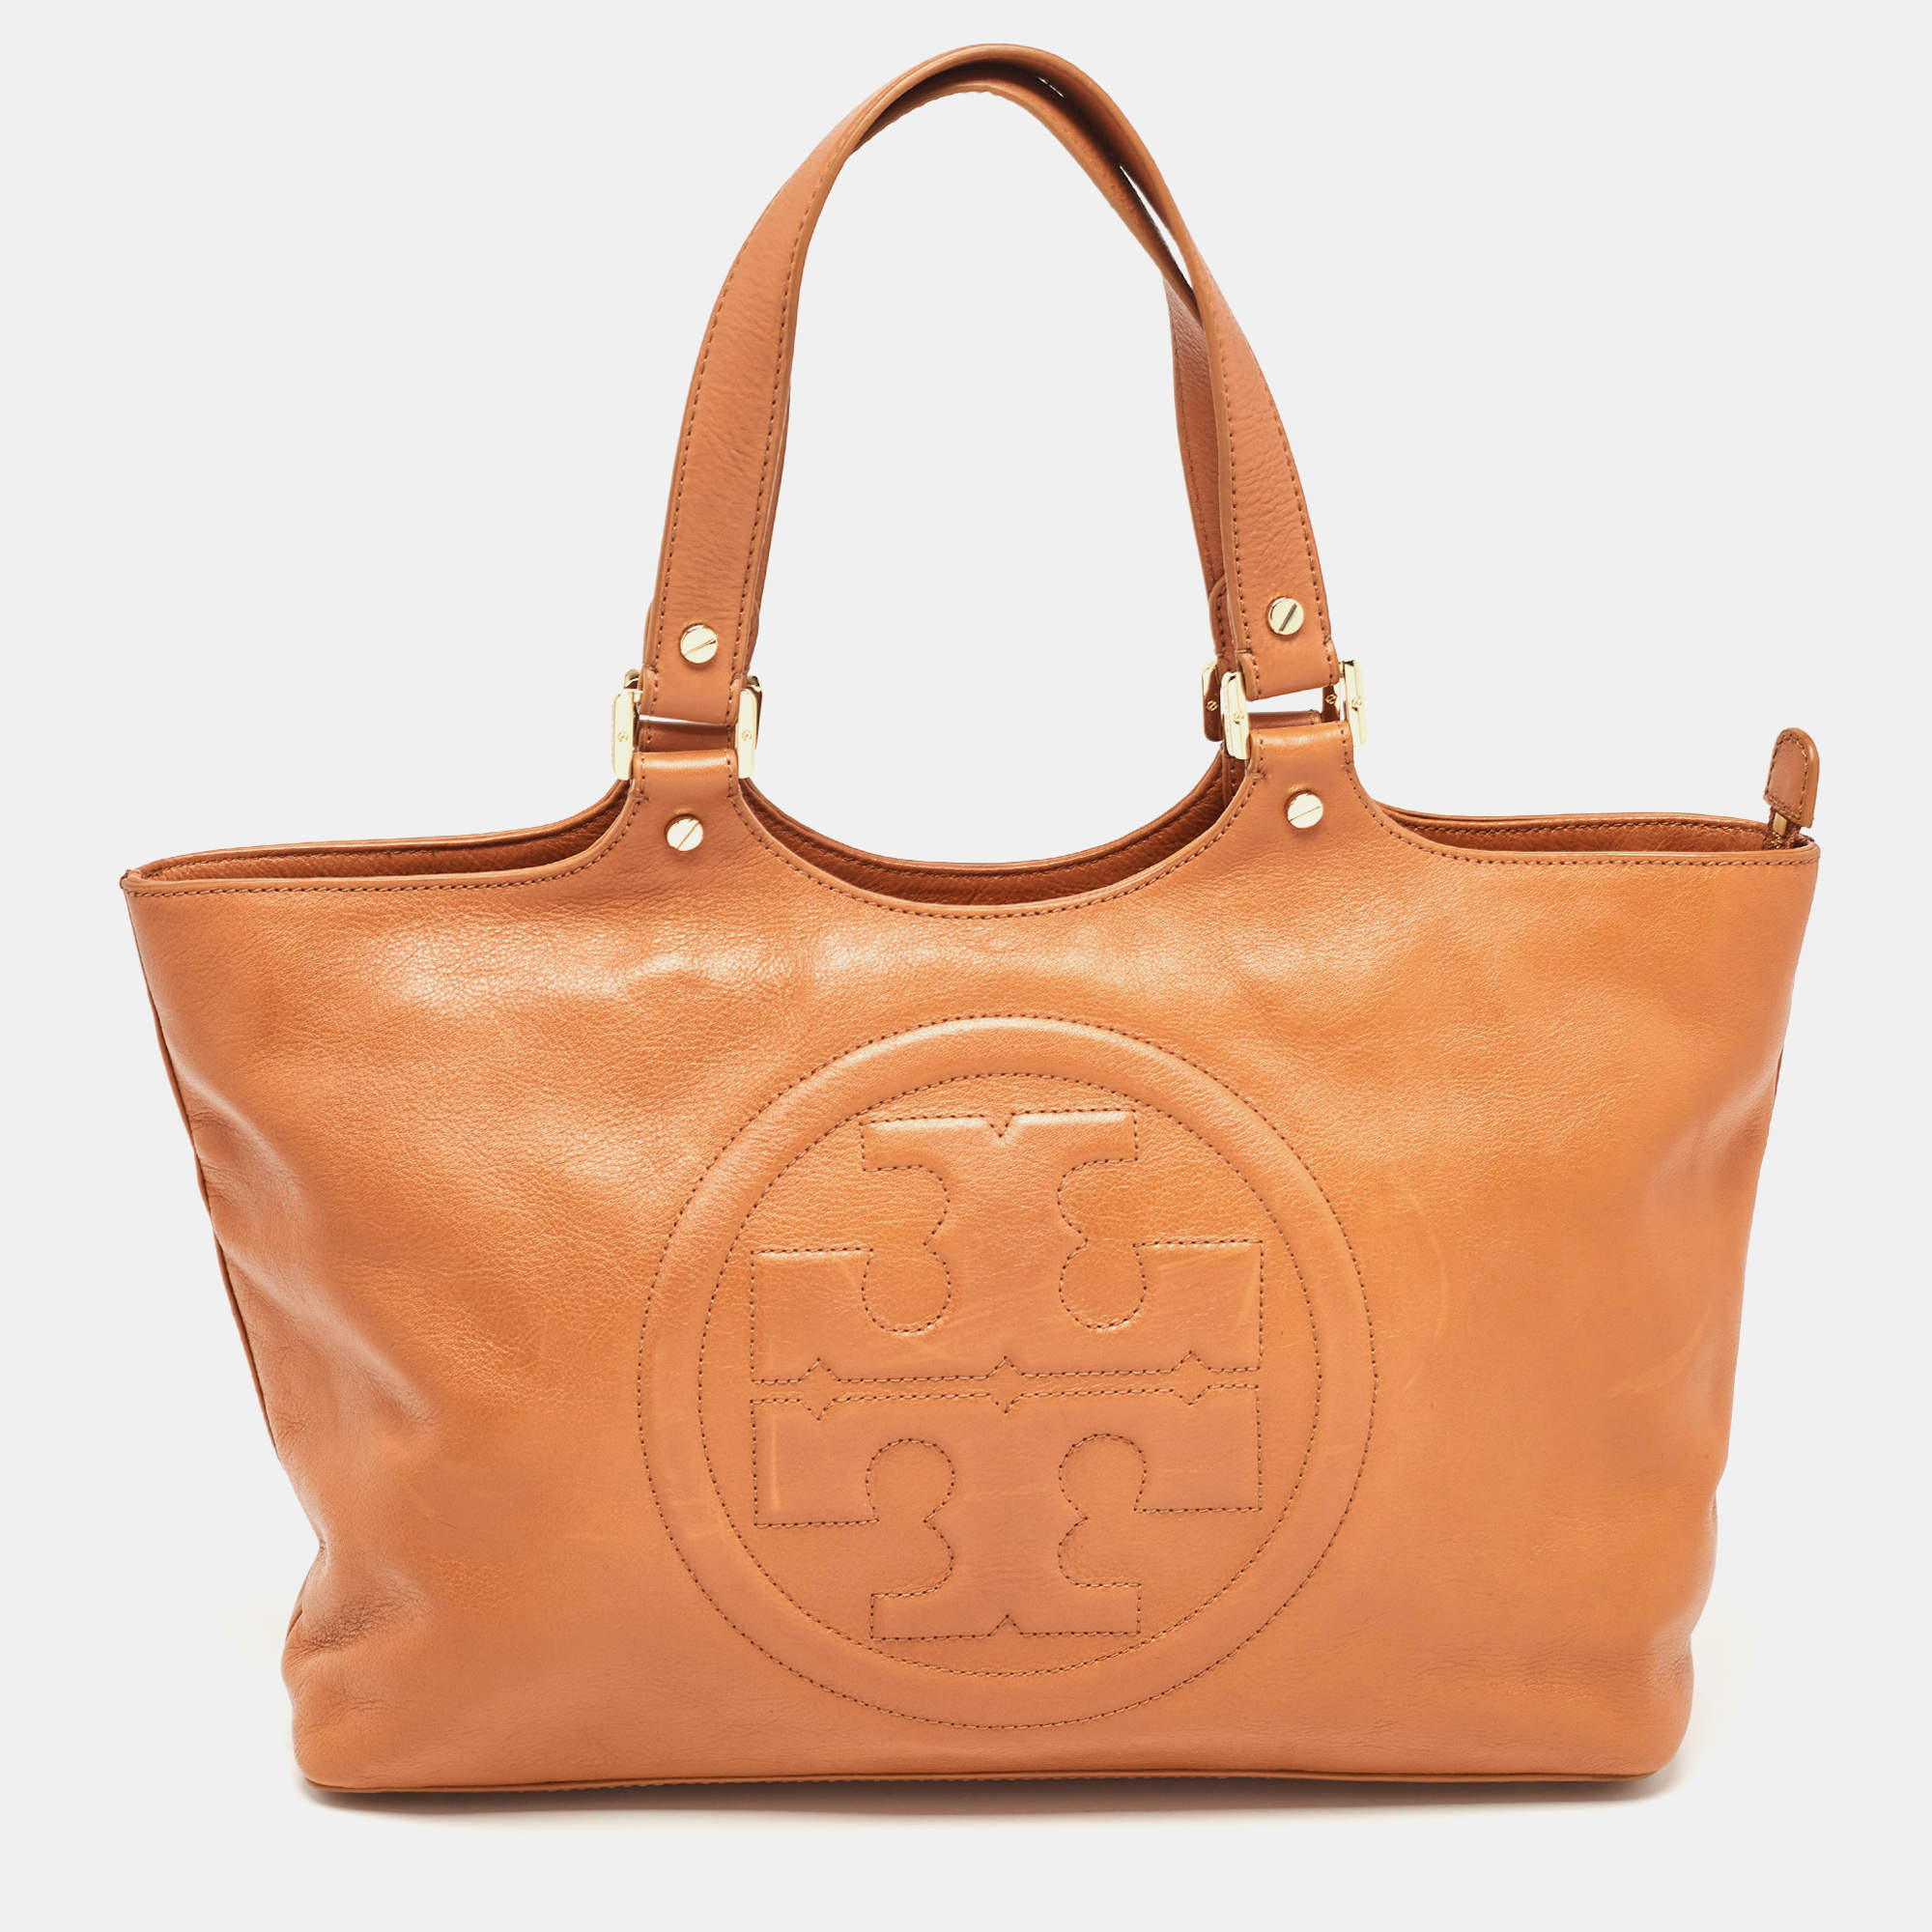 Tory Burch Brown Leather Bombe Tote Tory Burch | The Luxury Closet